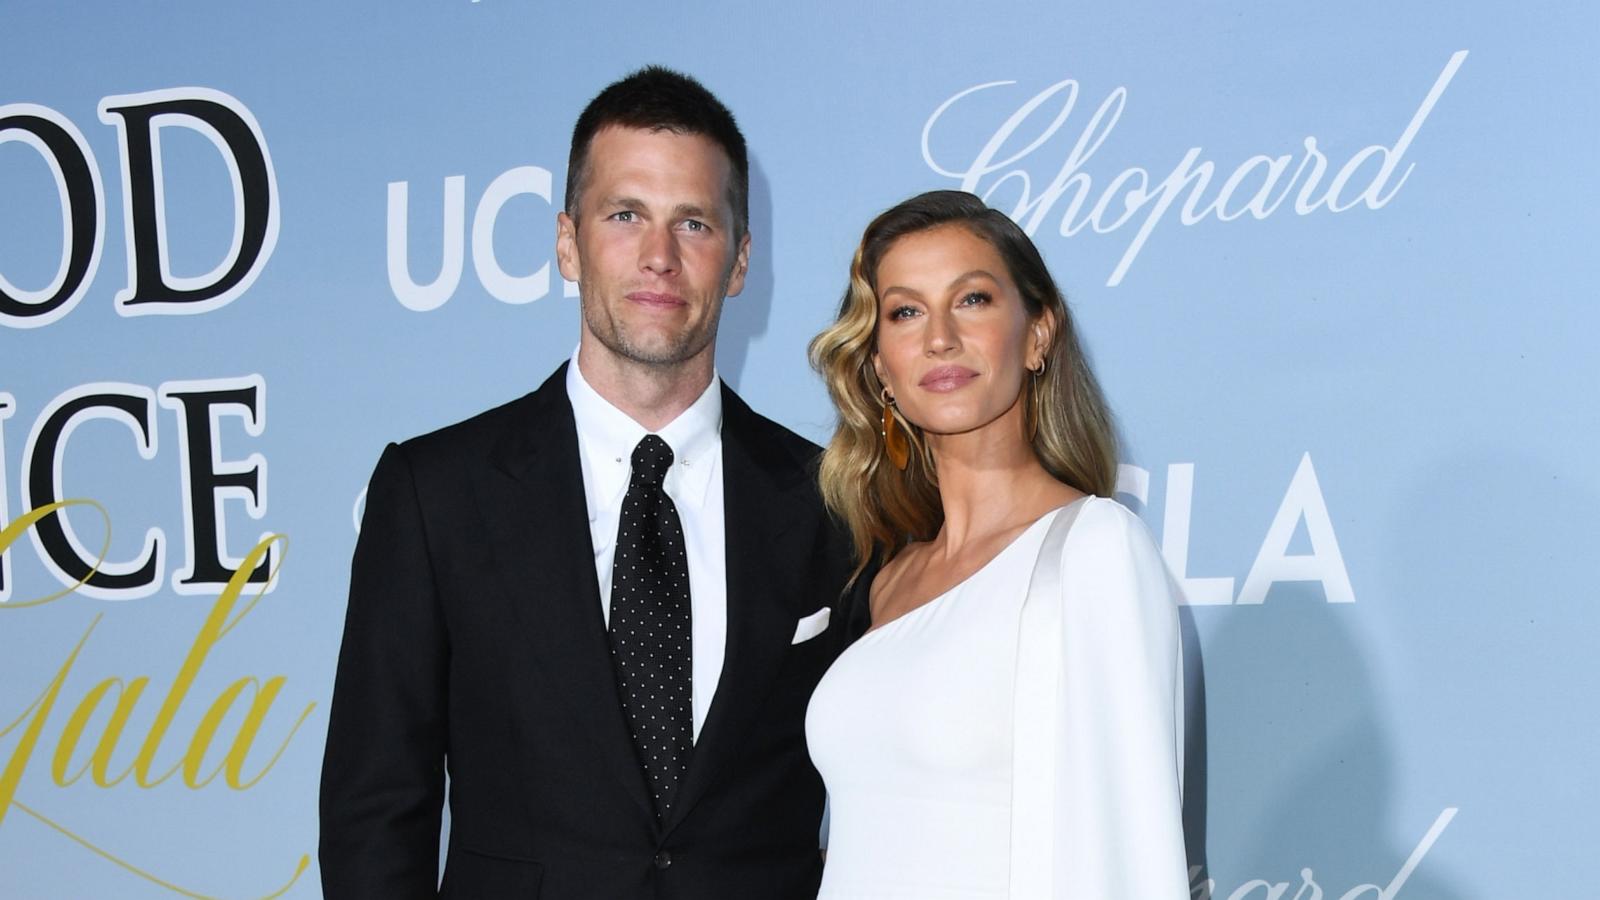 PHOTO: Tom Brady and Gisele Bundchen attend the 2019 Hollywood For Science Gala at Private Residence on February 21, 2019 in Los Angeles.